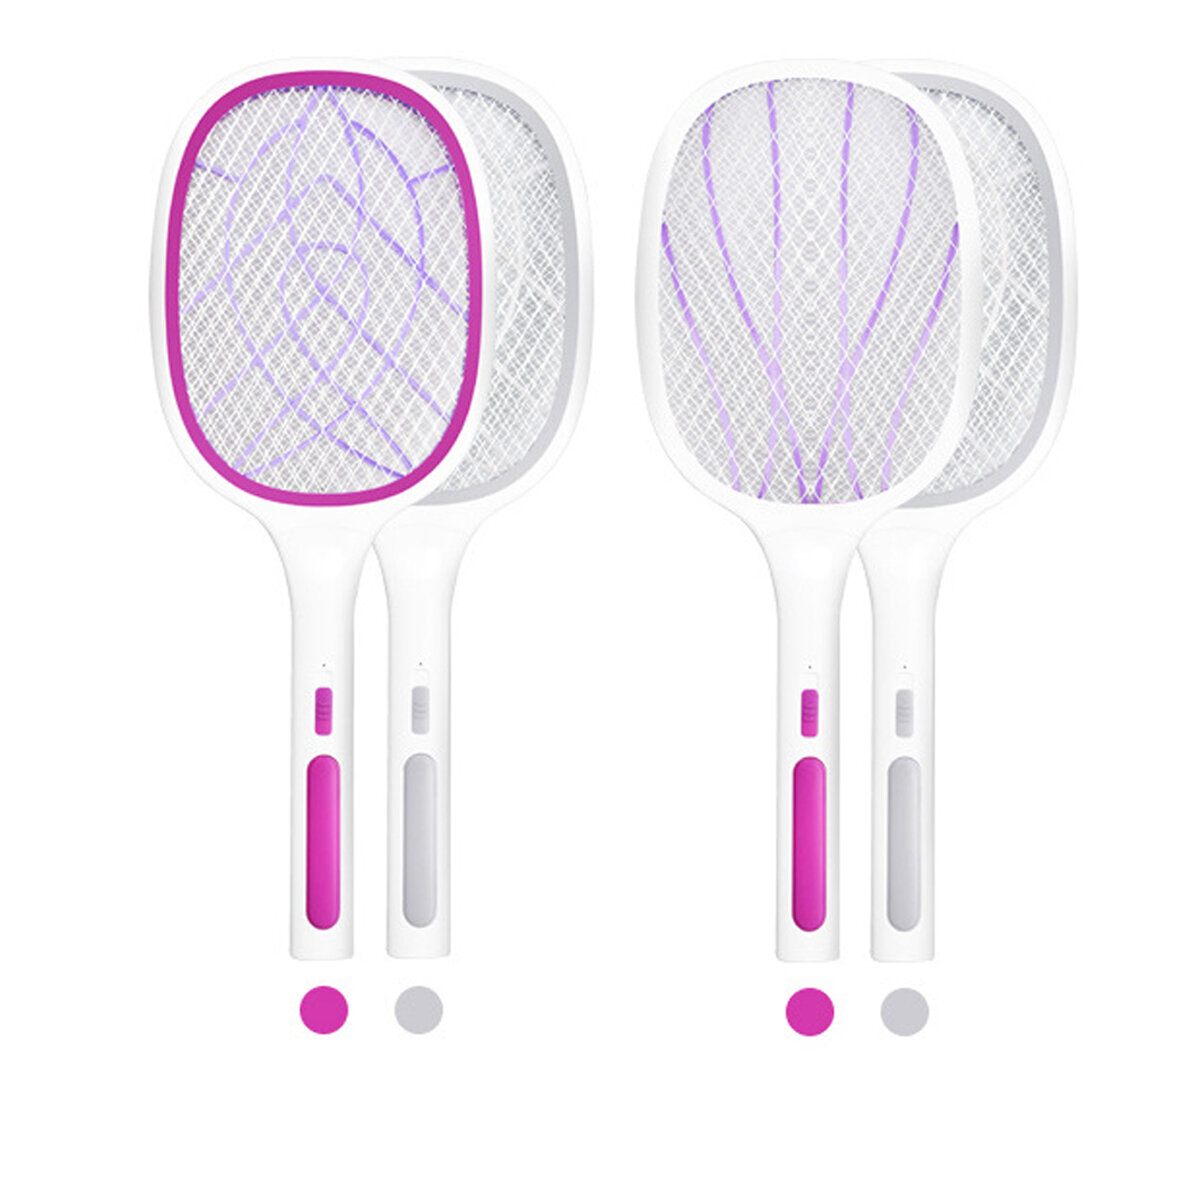 10/6LED Electric Flies Mosquito Swatter 3000V Anti Mosquito Fly Bug Zapper Racket Rechargeable Summe